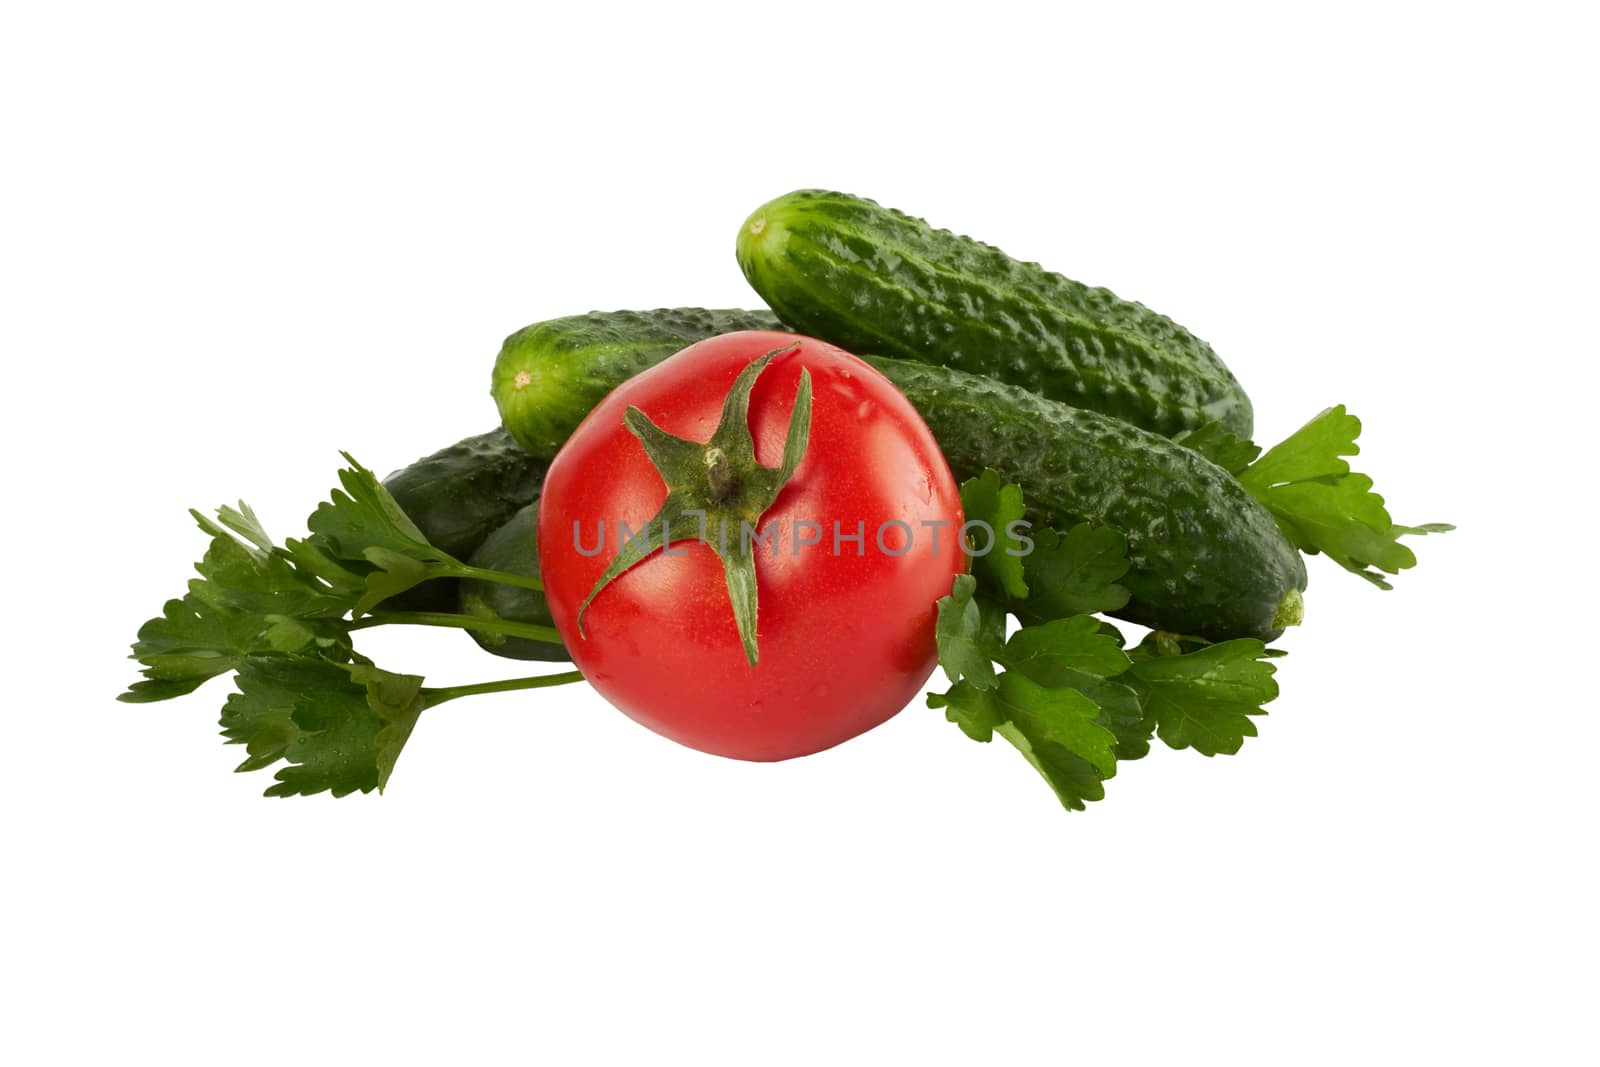 fresh vegetables and greenage isolated on white background 